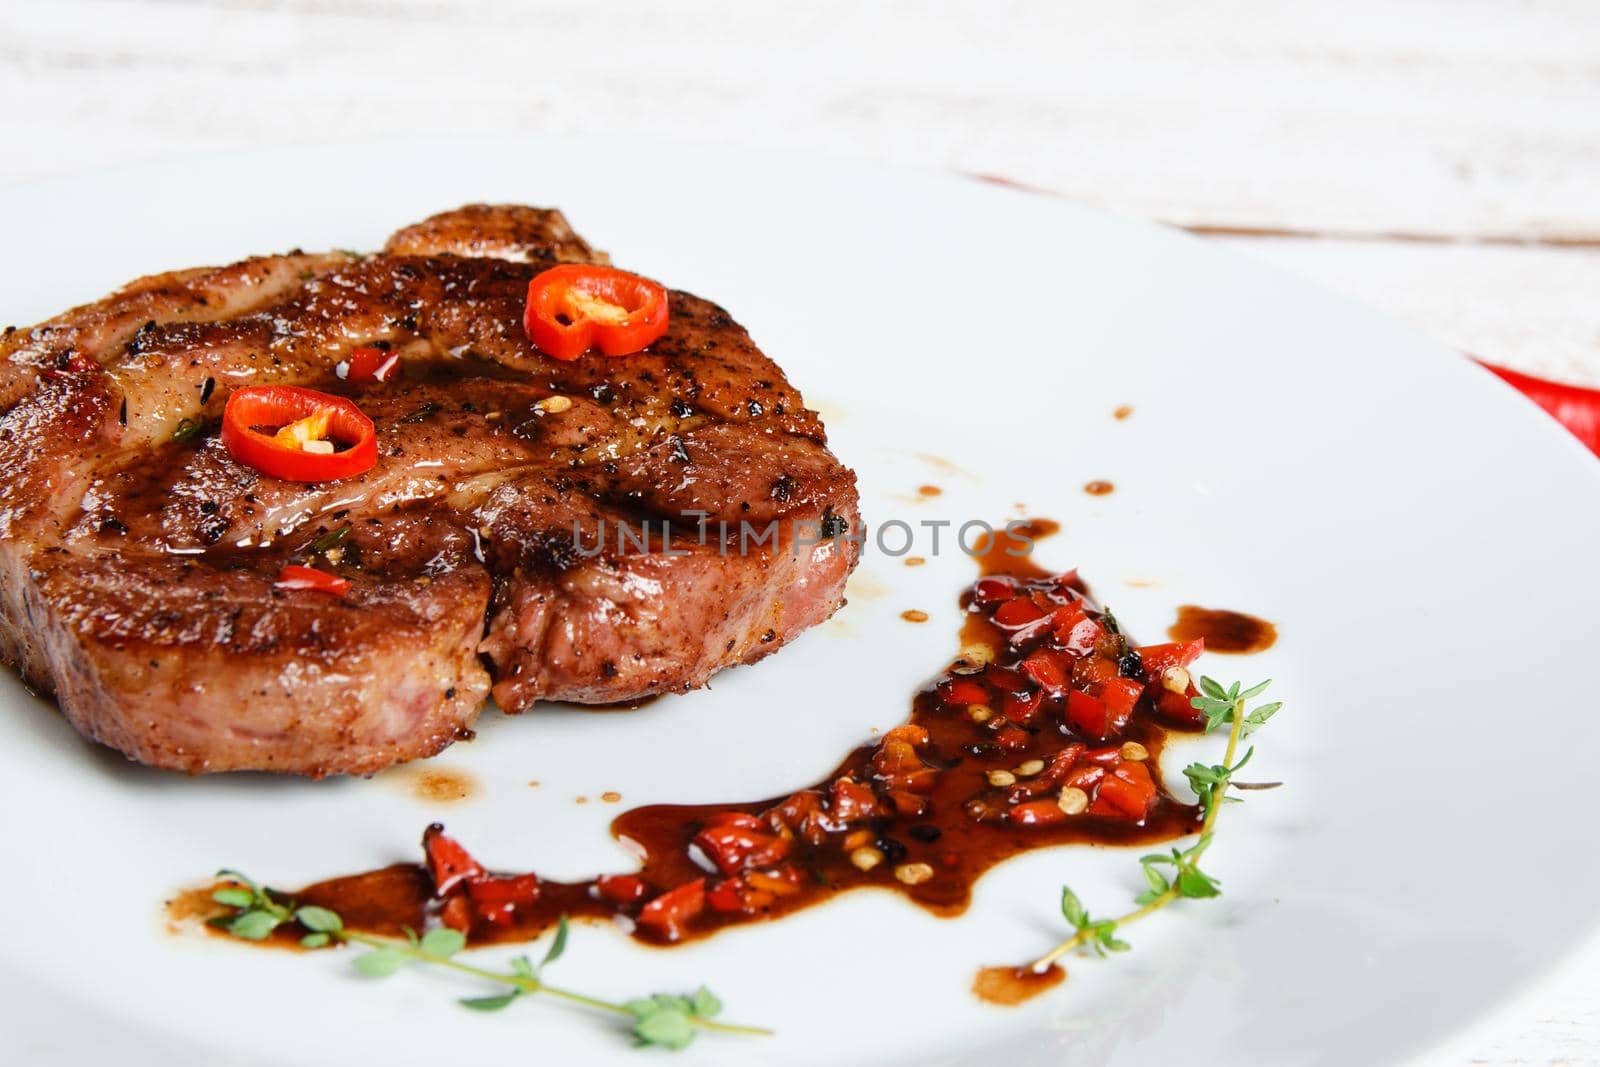 Steak on a white plate with spicy red sauce. Stock image.